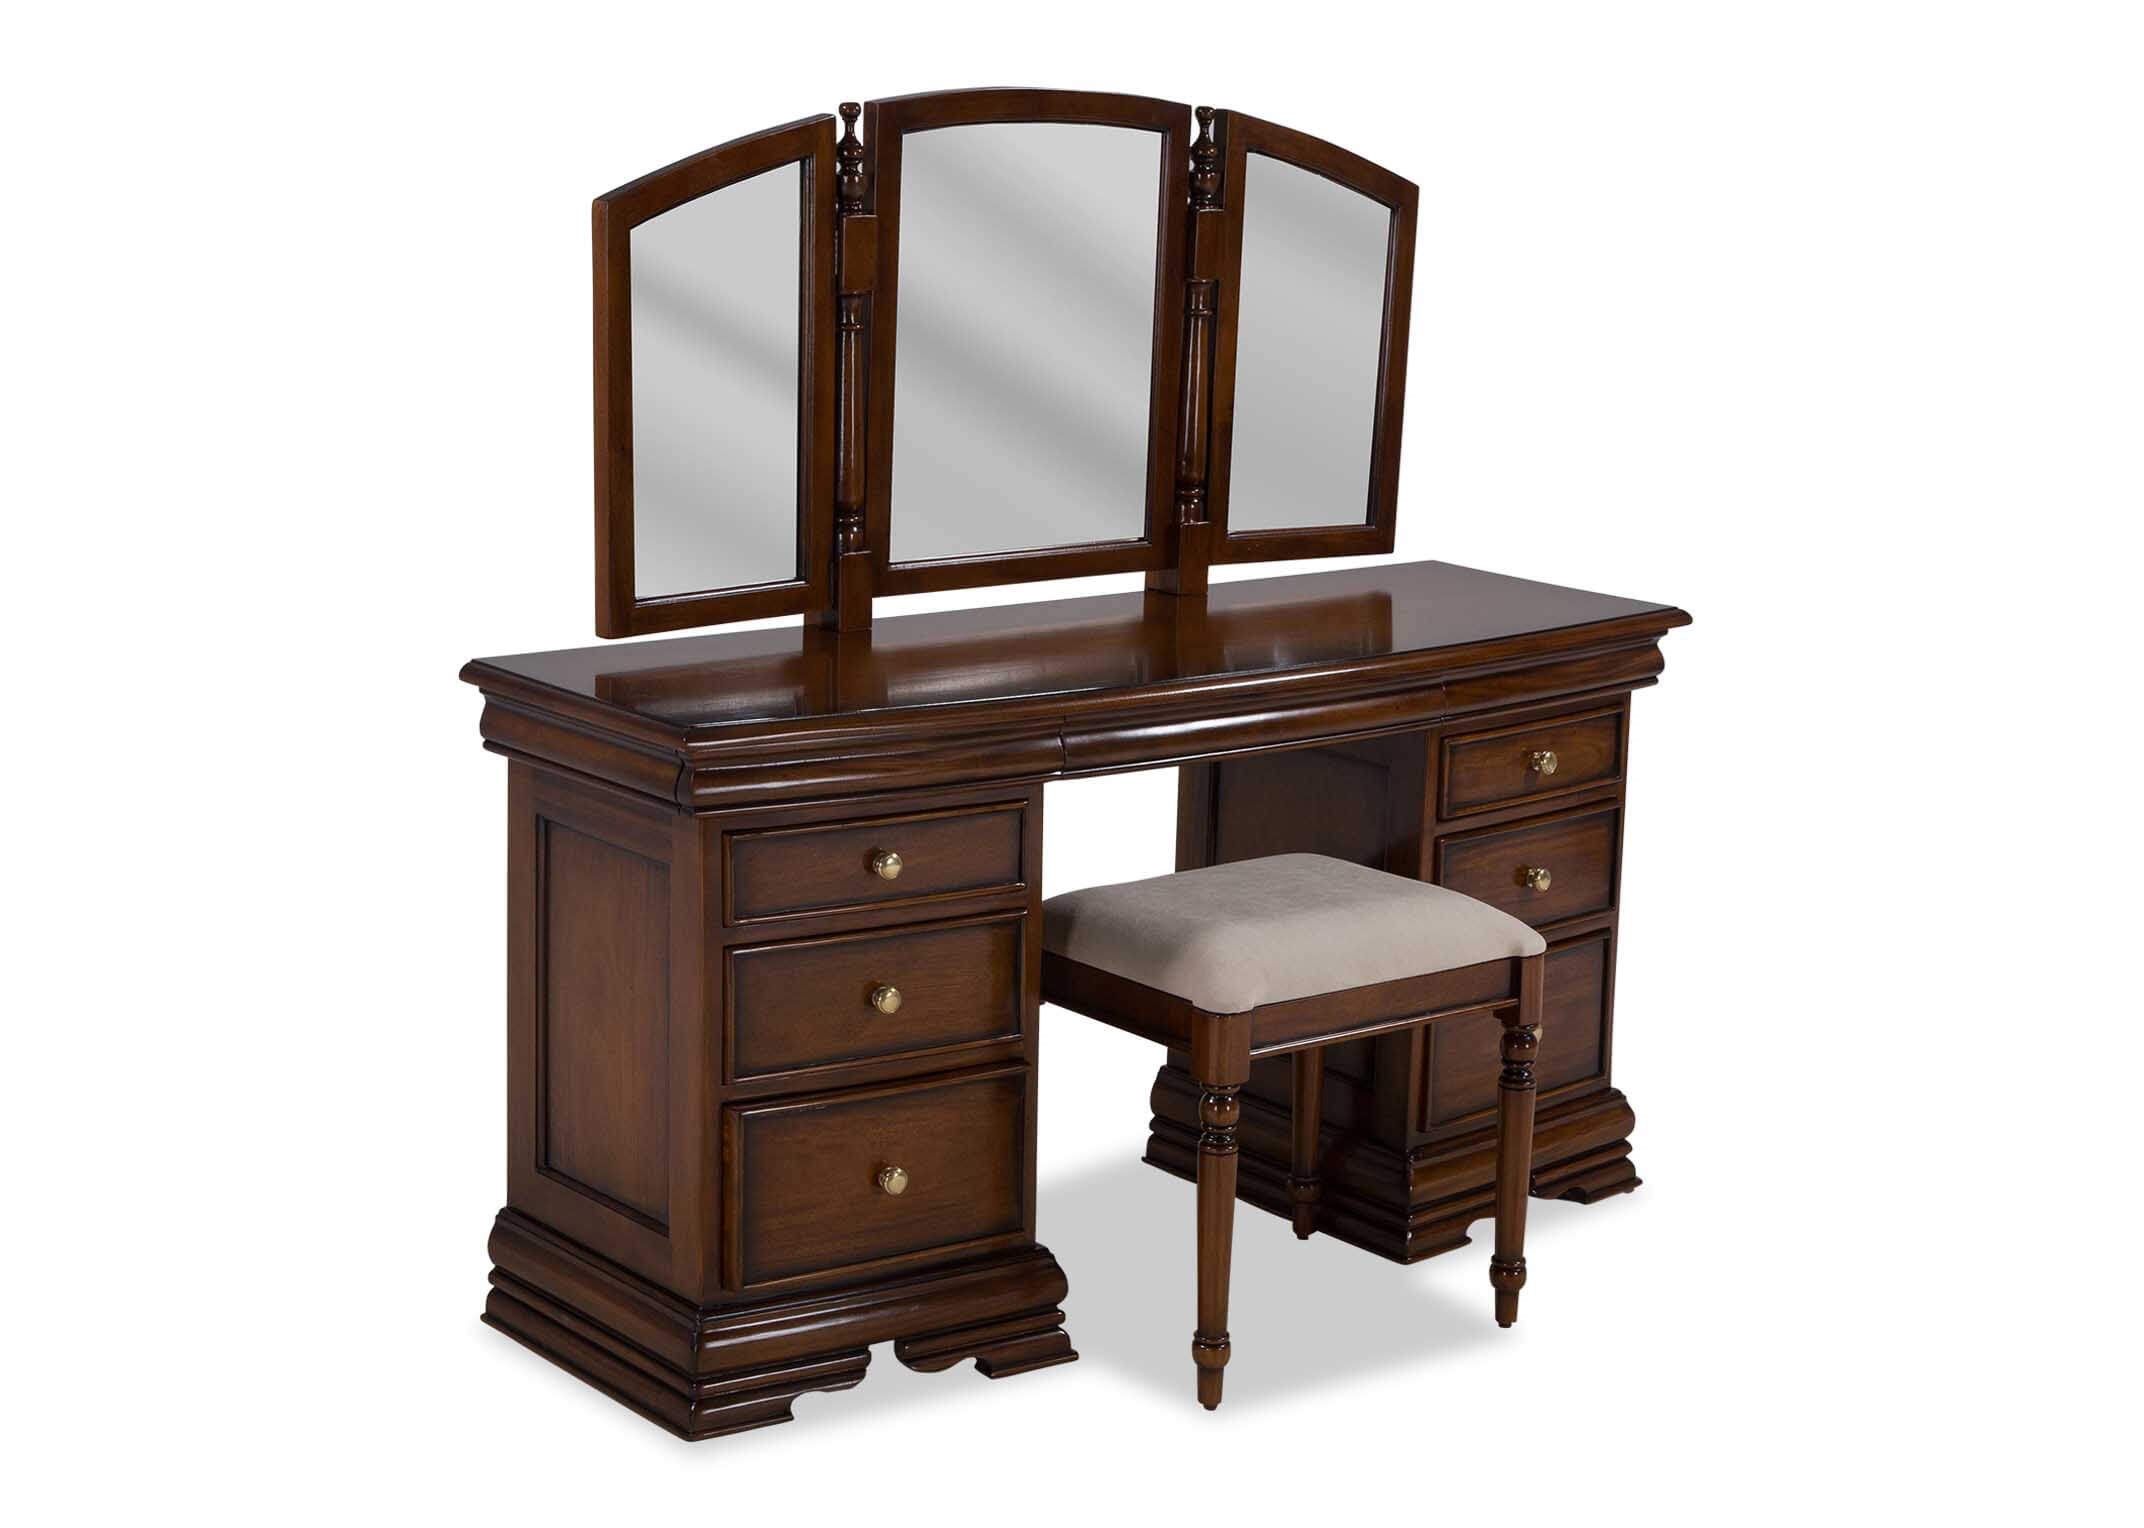 9 Drawer Mahogany Dressing Table Set, Mirrored Dressing Table With Drawers Ireland